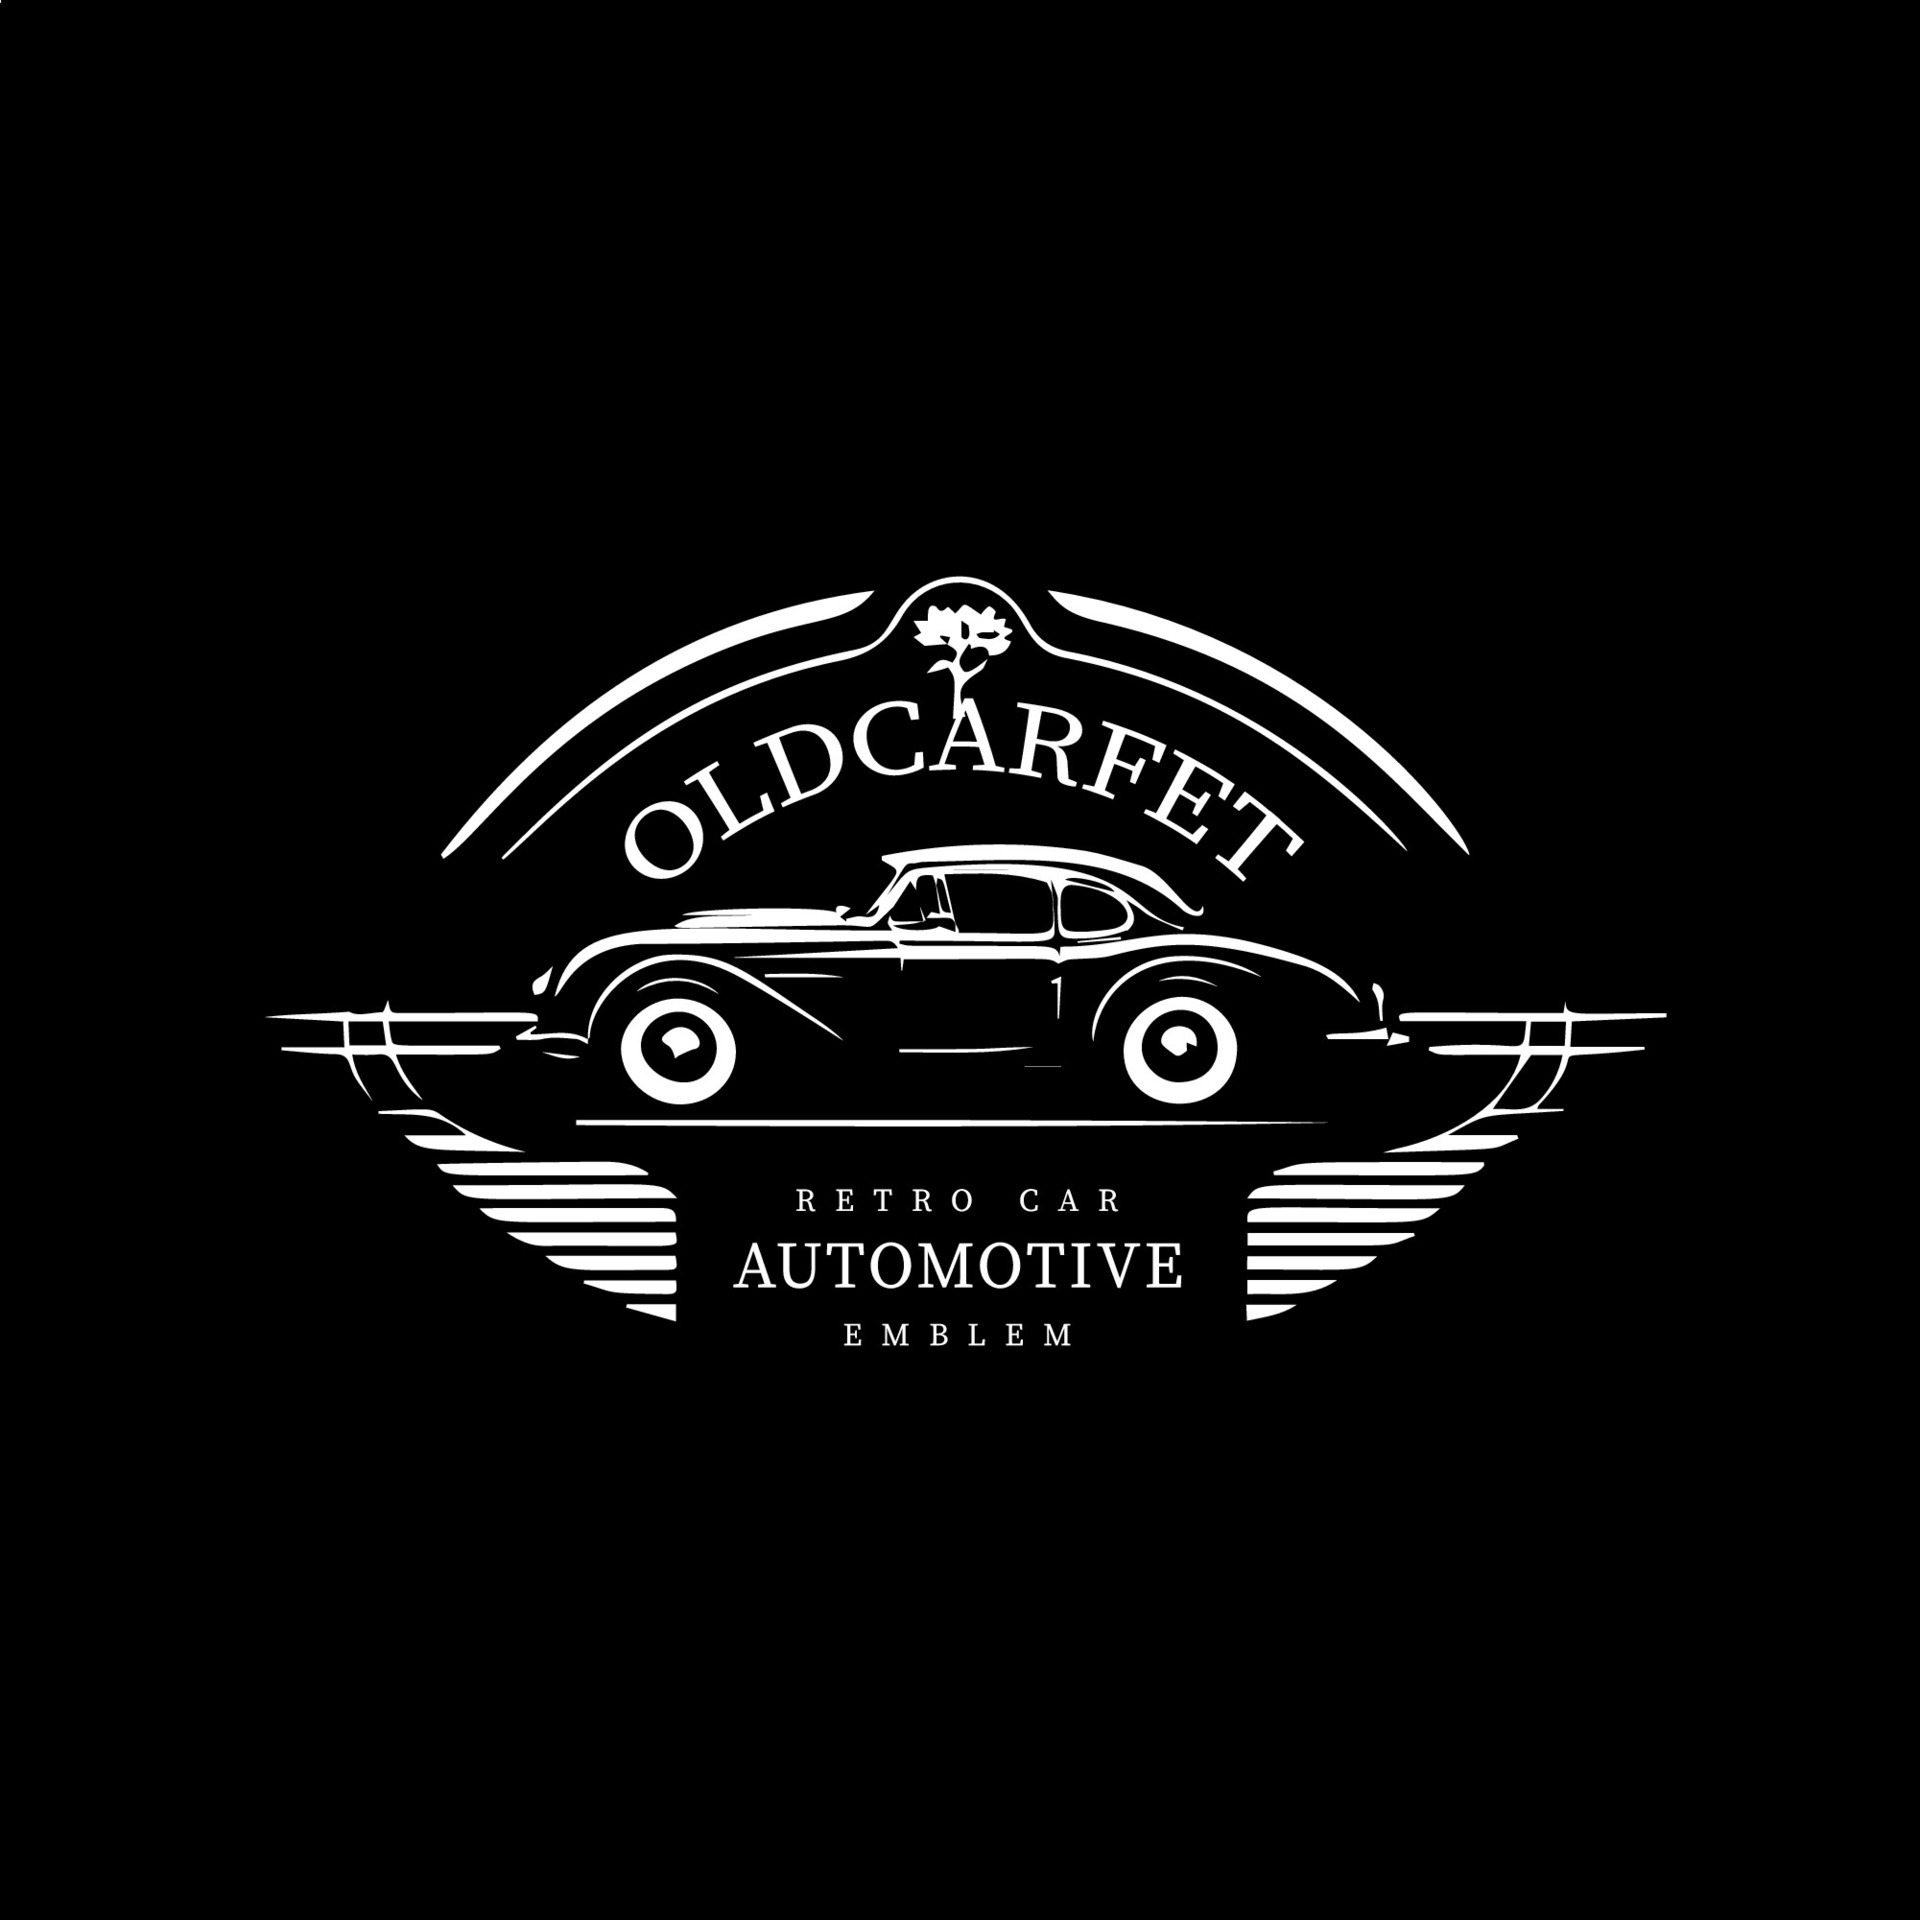 Minimalistic logo template, white icon of old car silhouette on